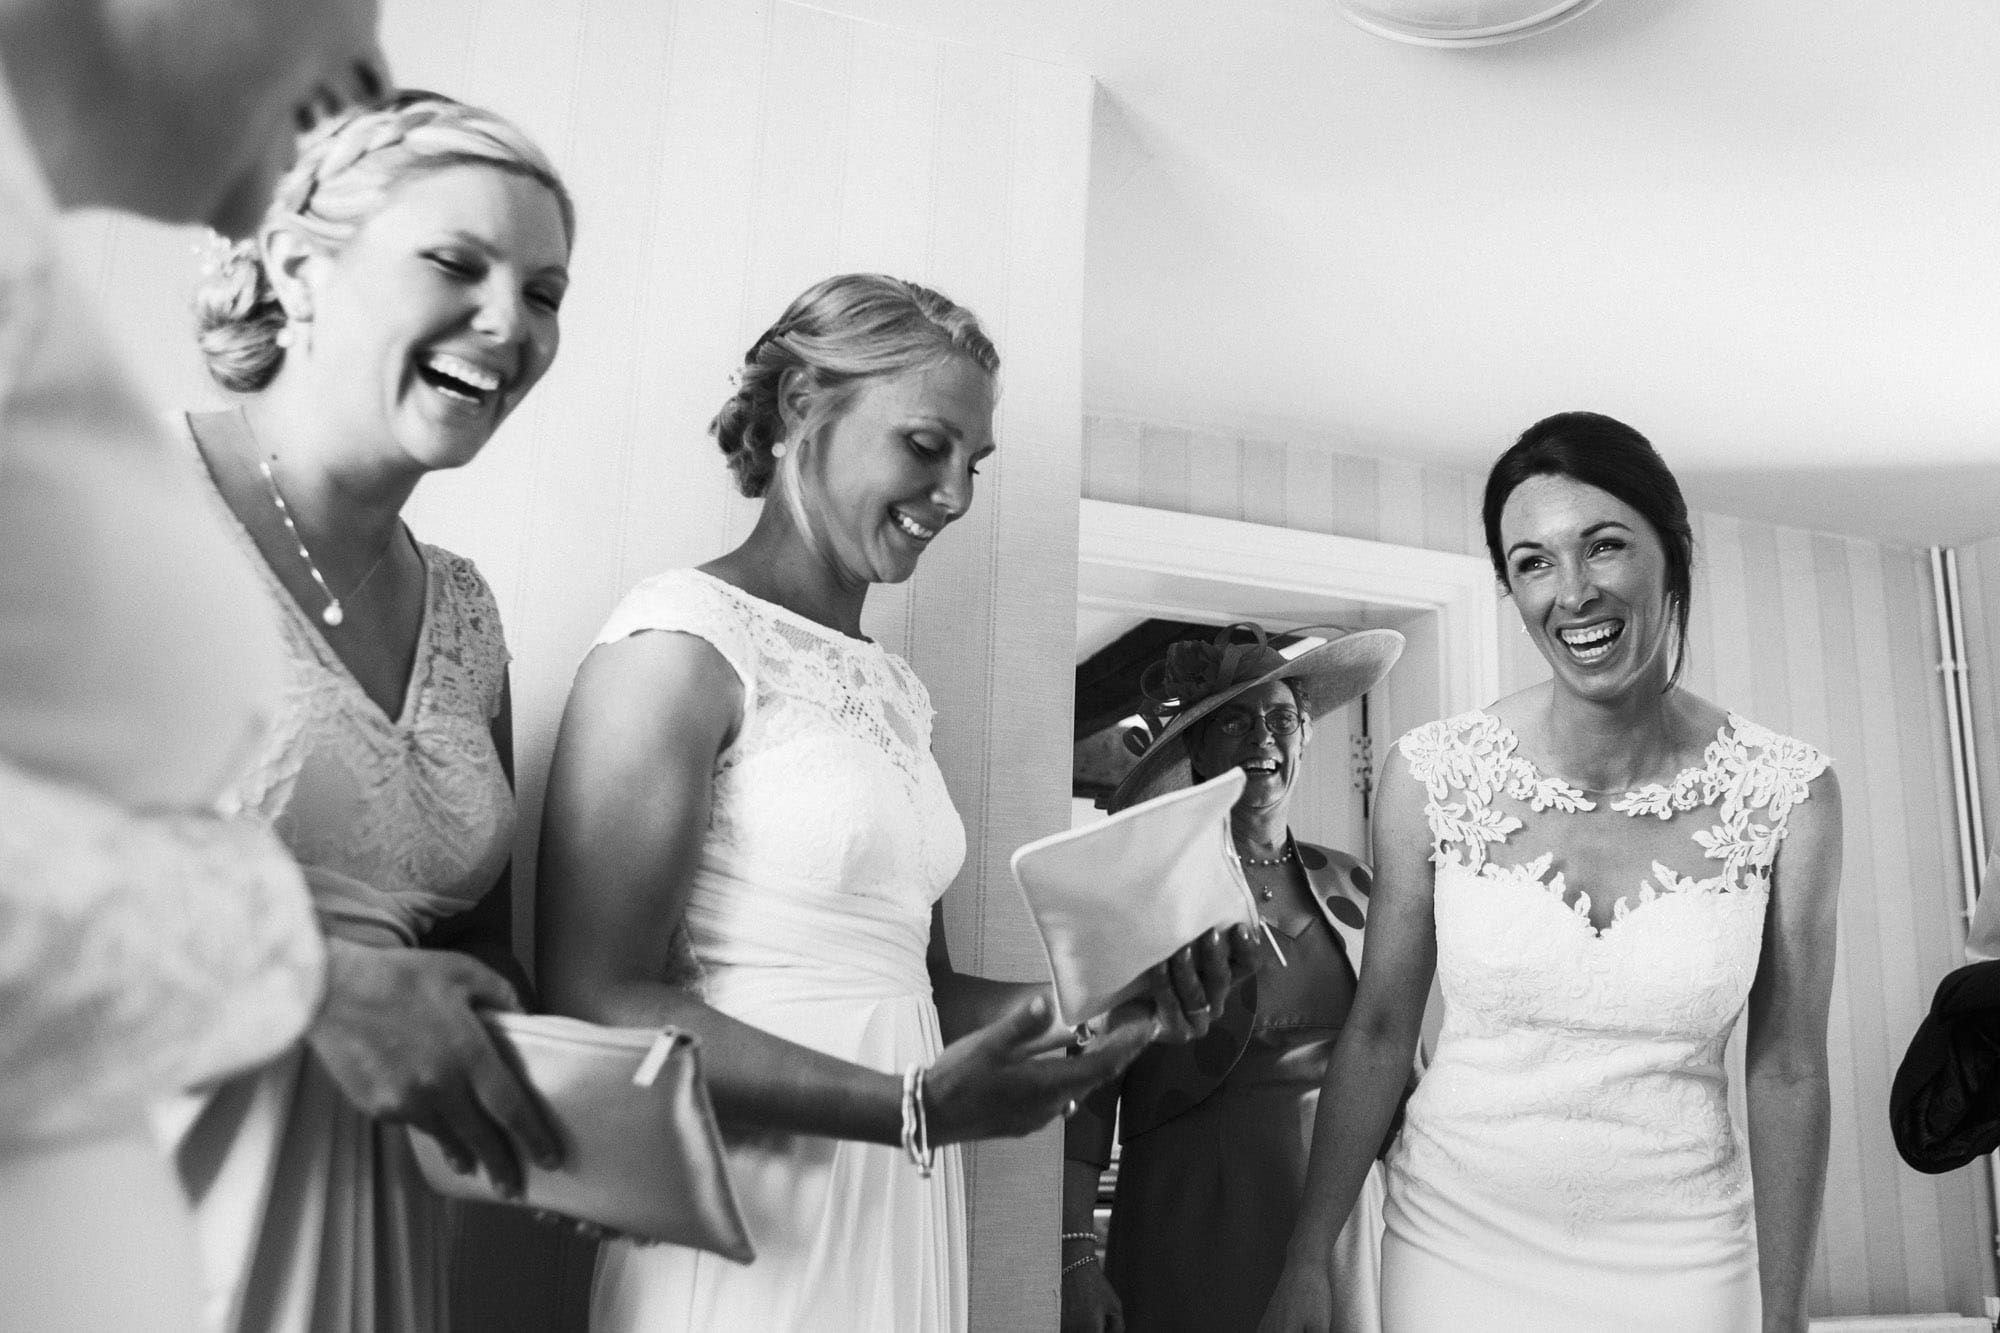 bridesmaids and bride laughing